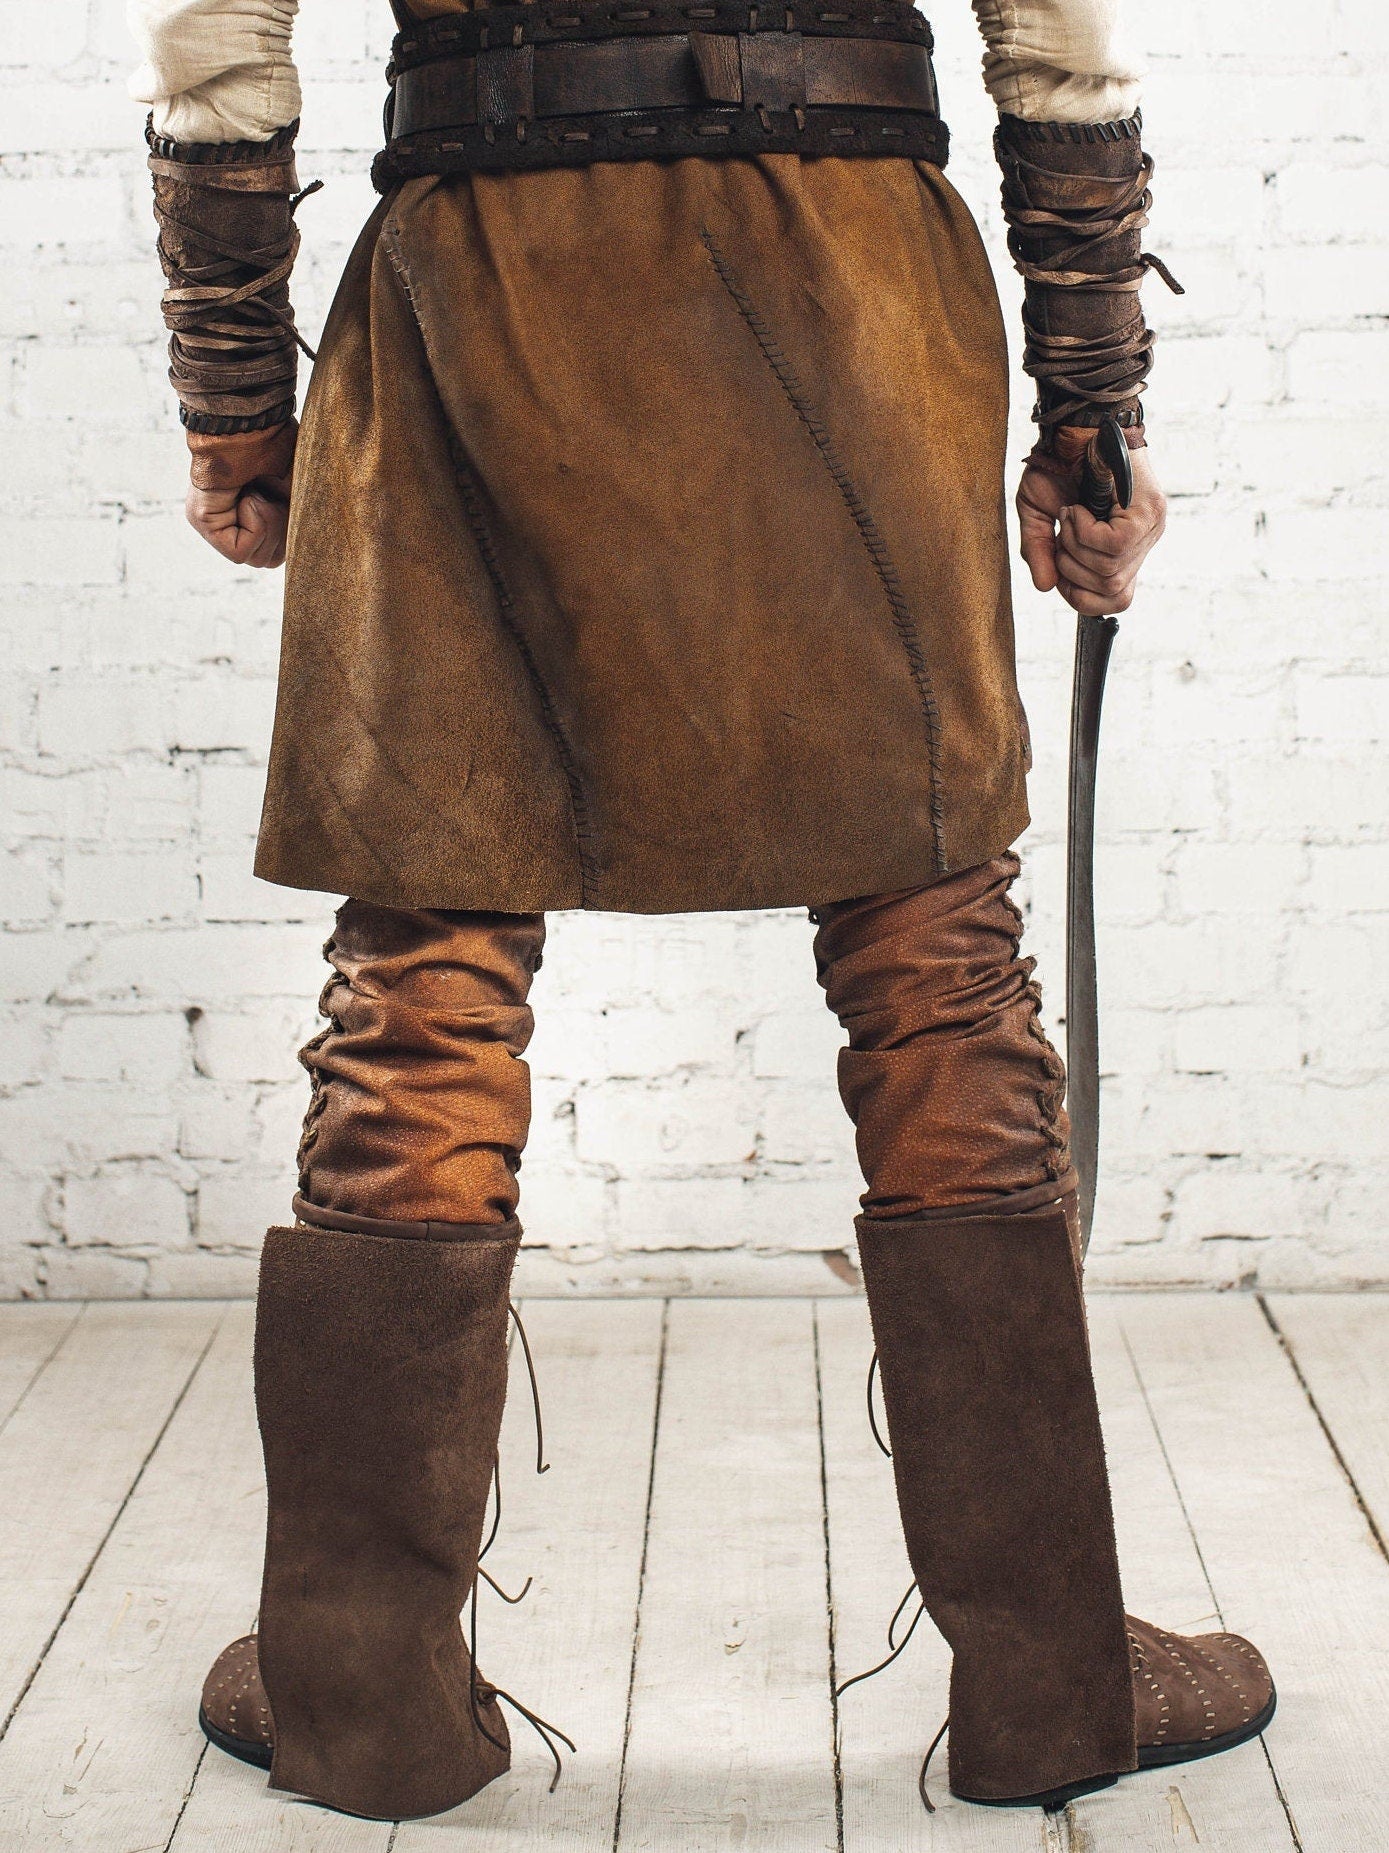 Medieval leather high boots with buckles